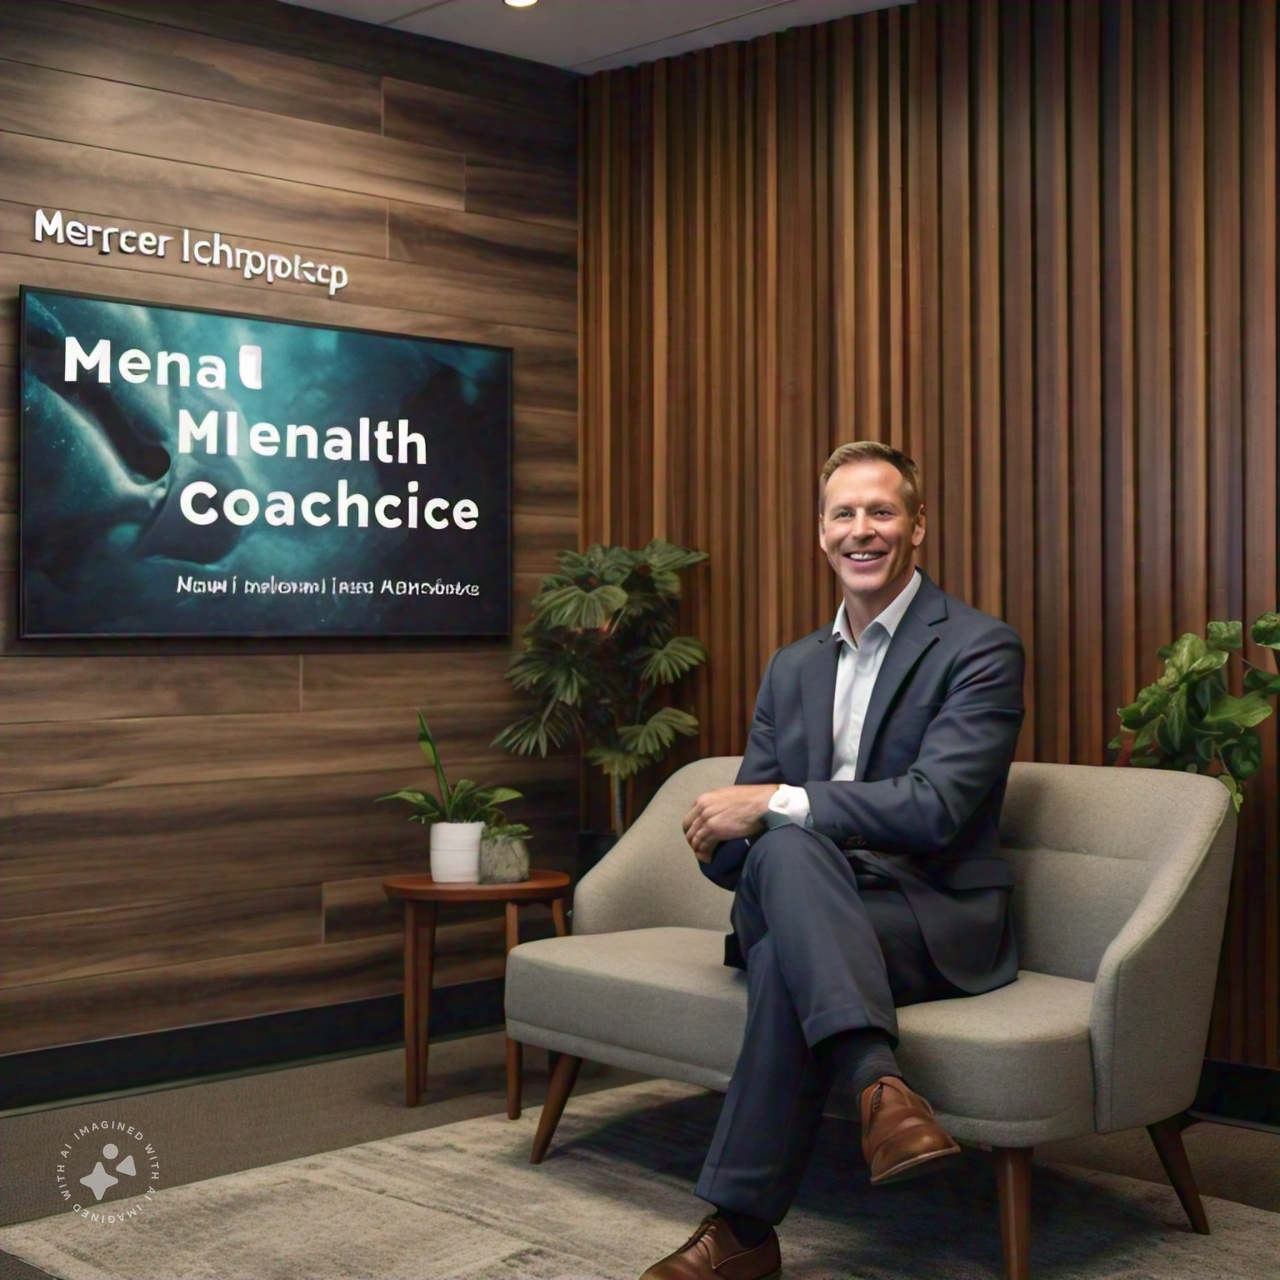 Mercer Island Chiropractic Introduces Expert Life Coach for Enhanced Mental Health Coaching